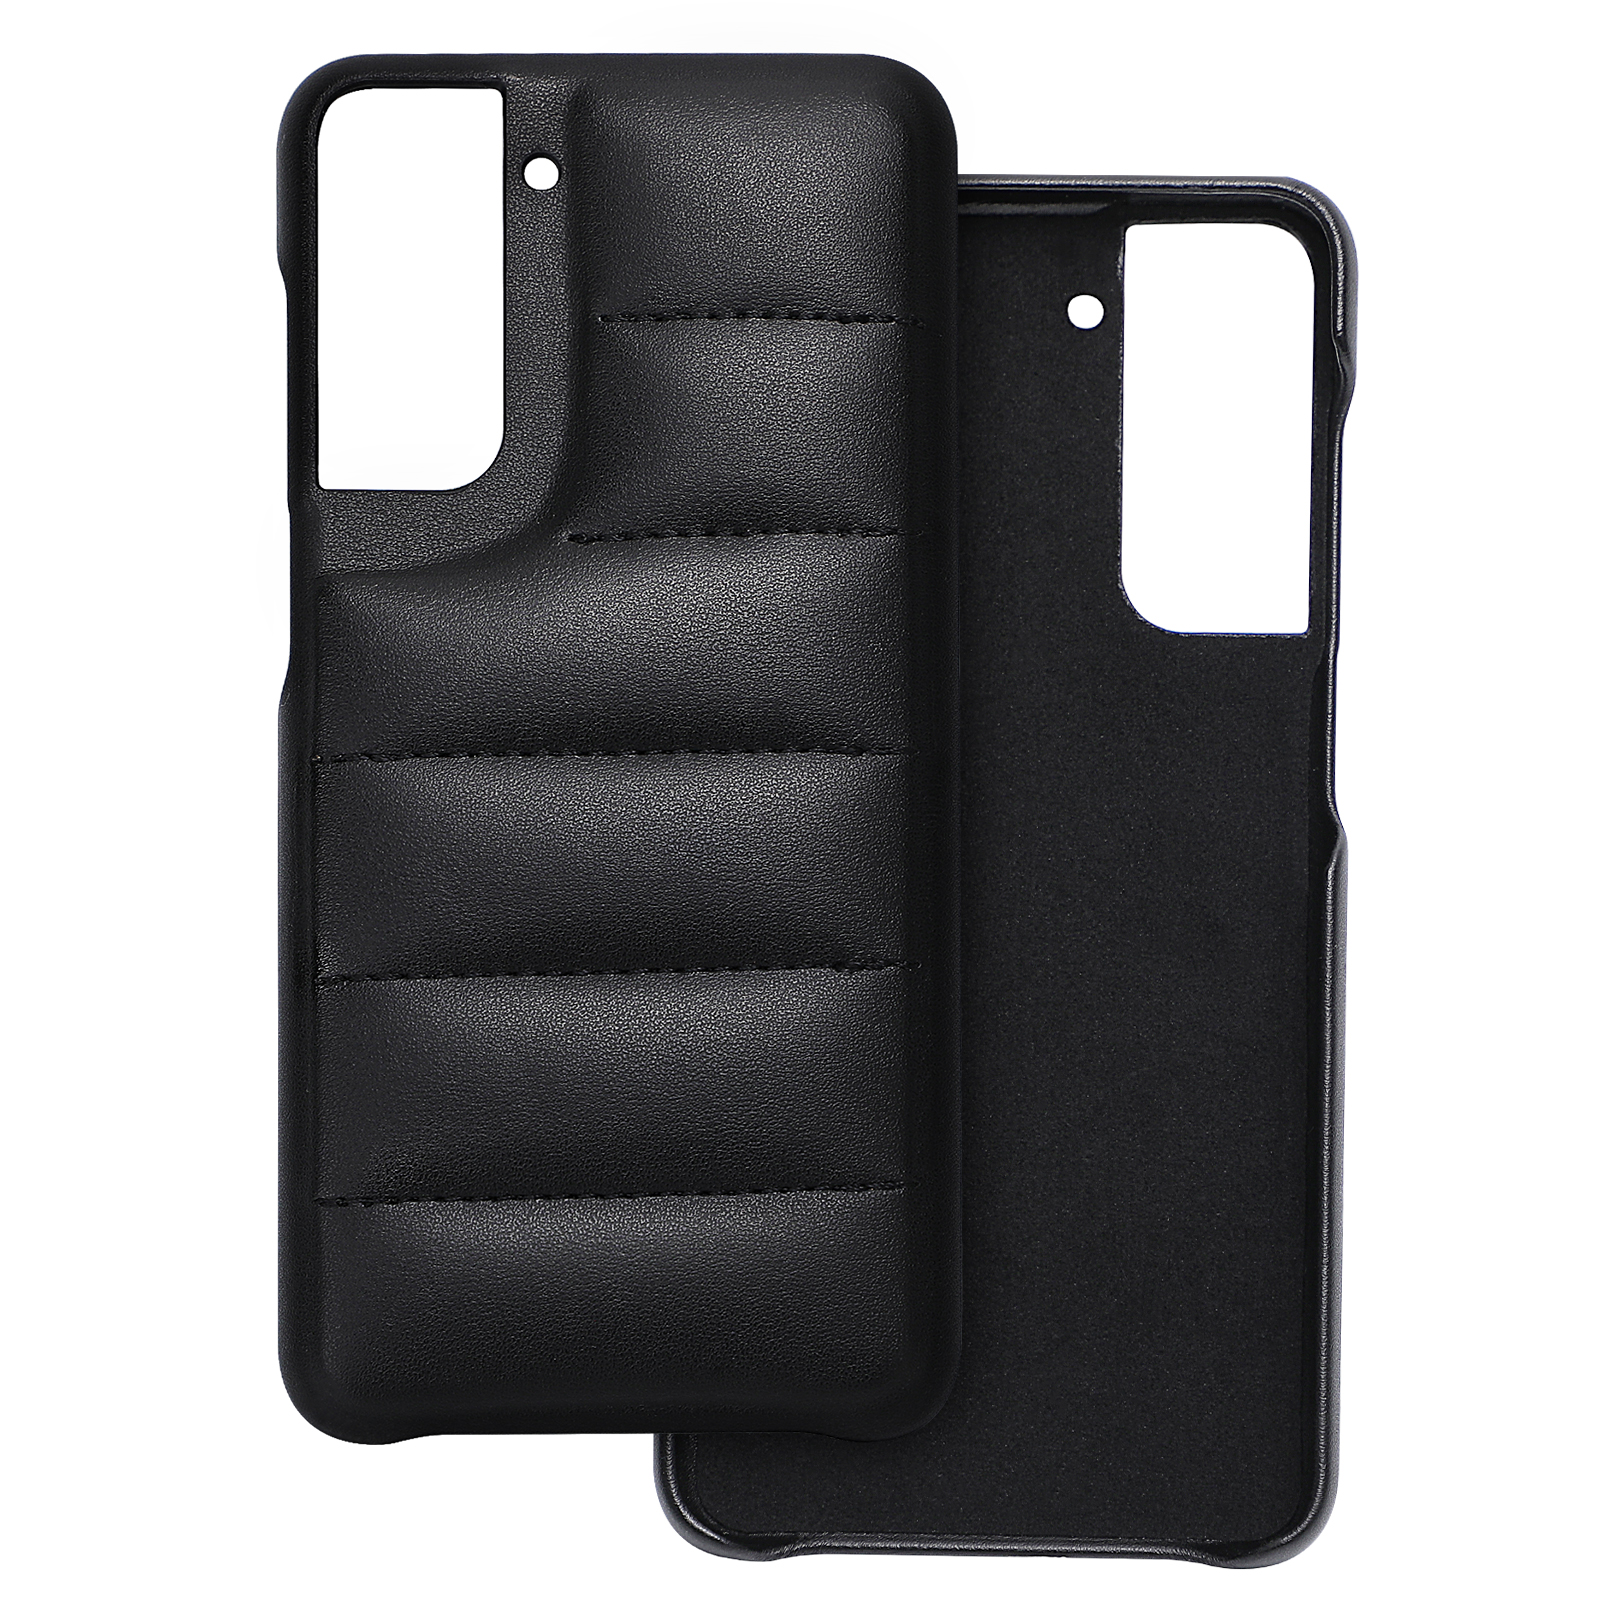 Hot Off for Samsung Galaxy S21 Case, Nappa Leather Puffer Phone Case, Galaxy S21 Case [Full Body Protection] [Non-Slip] Shockproof Protective Phone Case, Black for Galaxy S21 - image 1 of 5